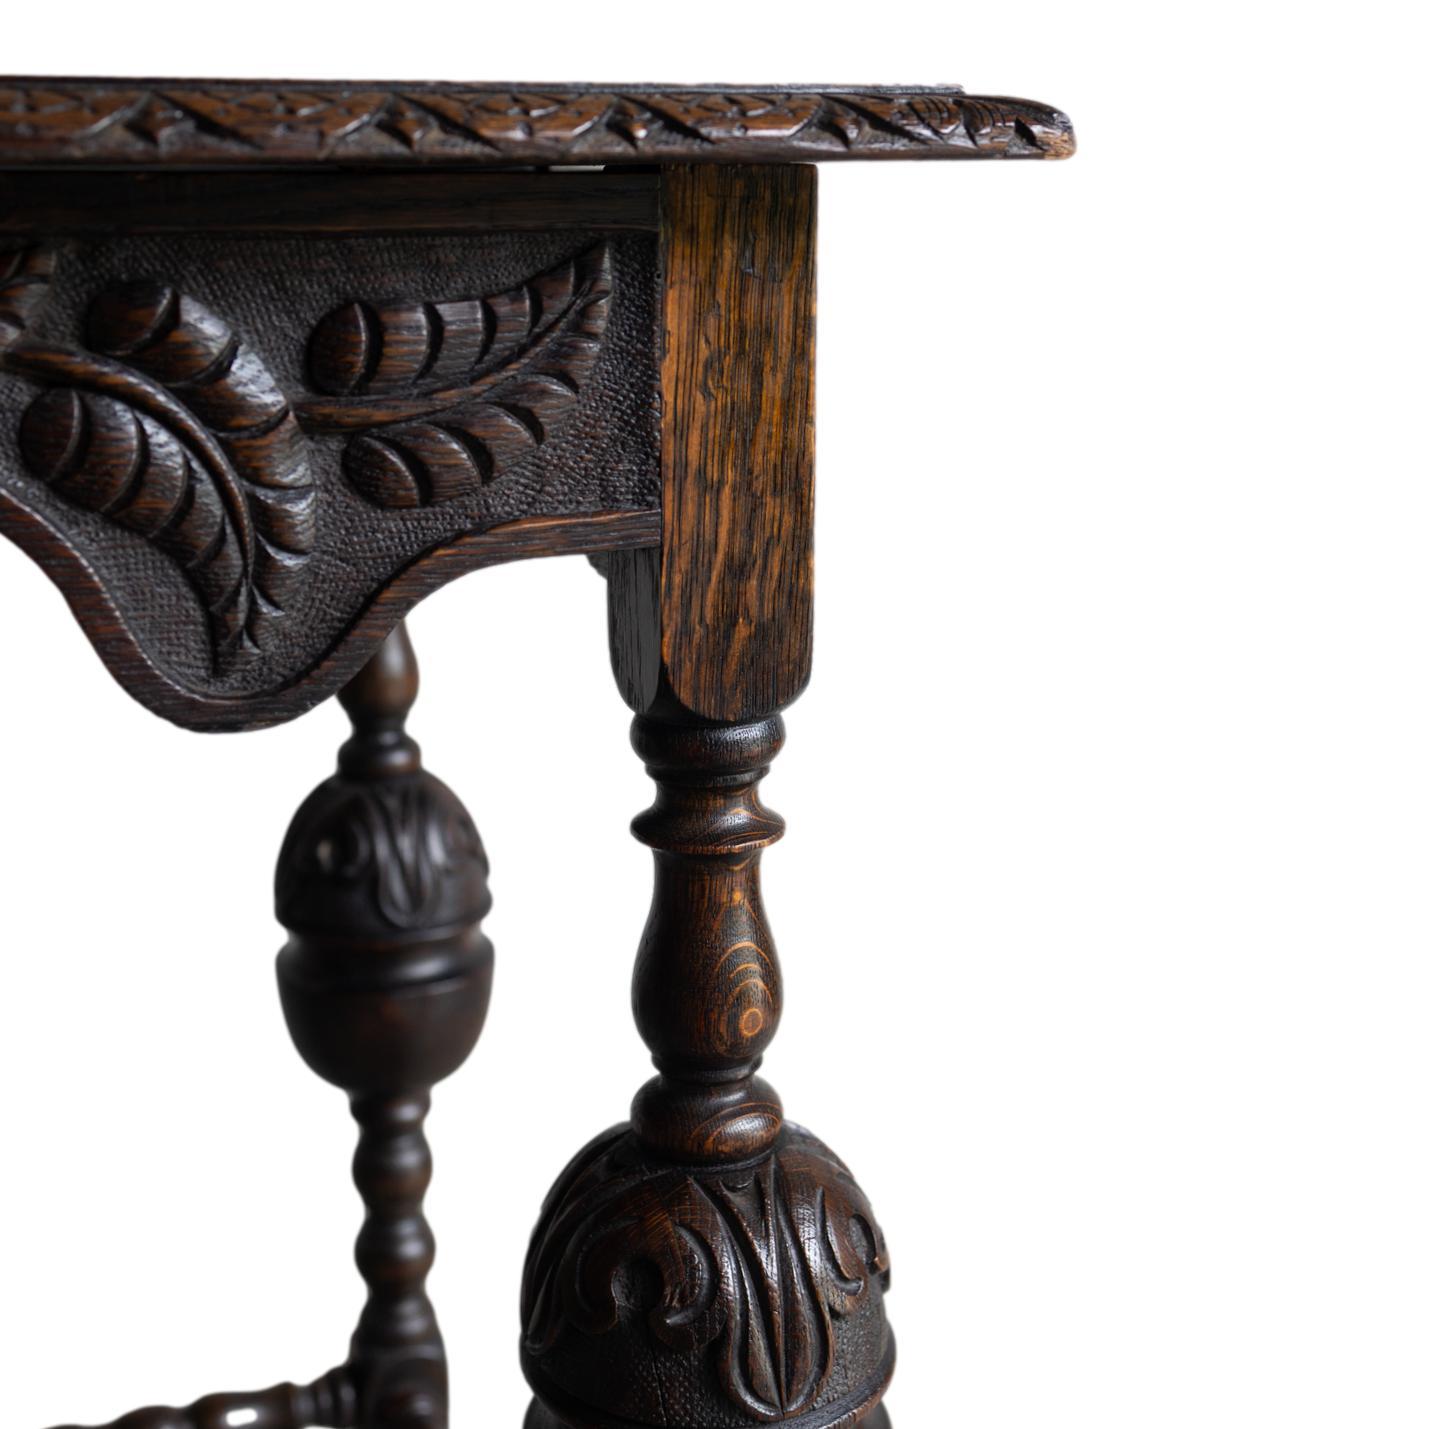 Late 19th Century A Tudor-Style Carved Oak Center Table with Daisy Medallions, English, ca. 1880 For Sale